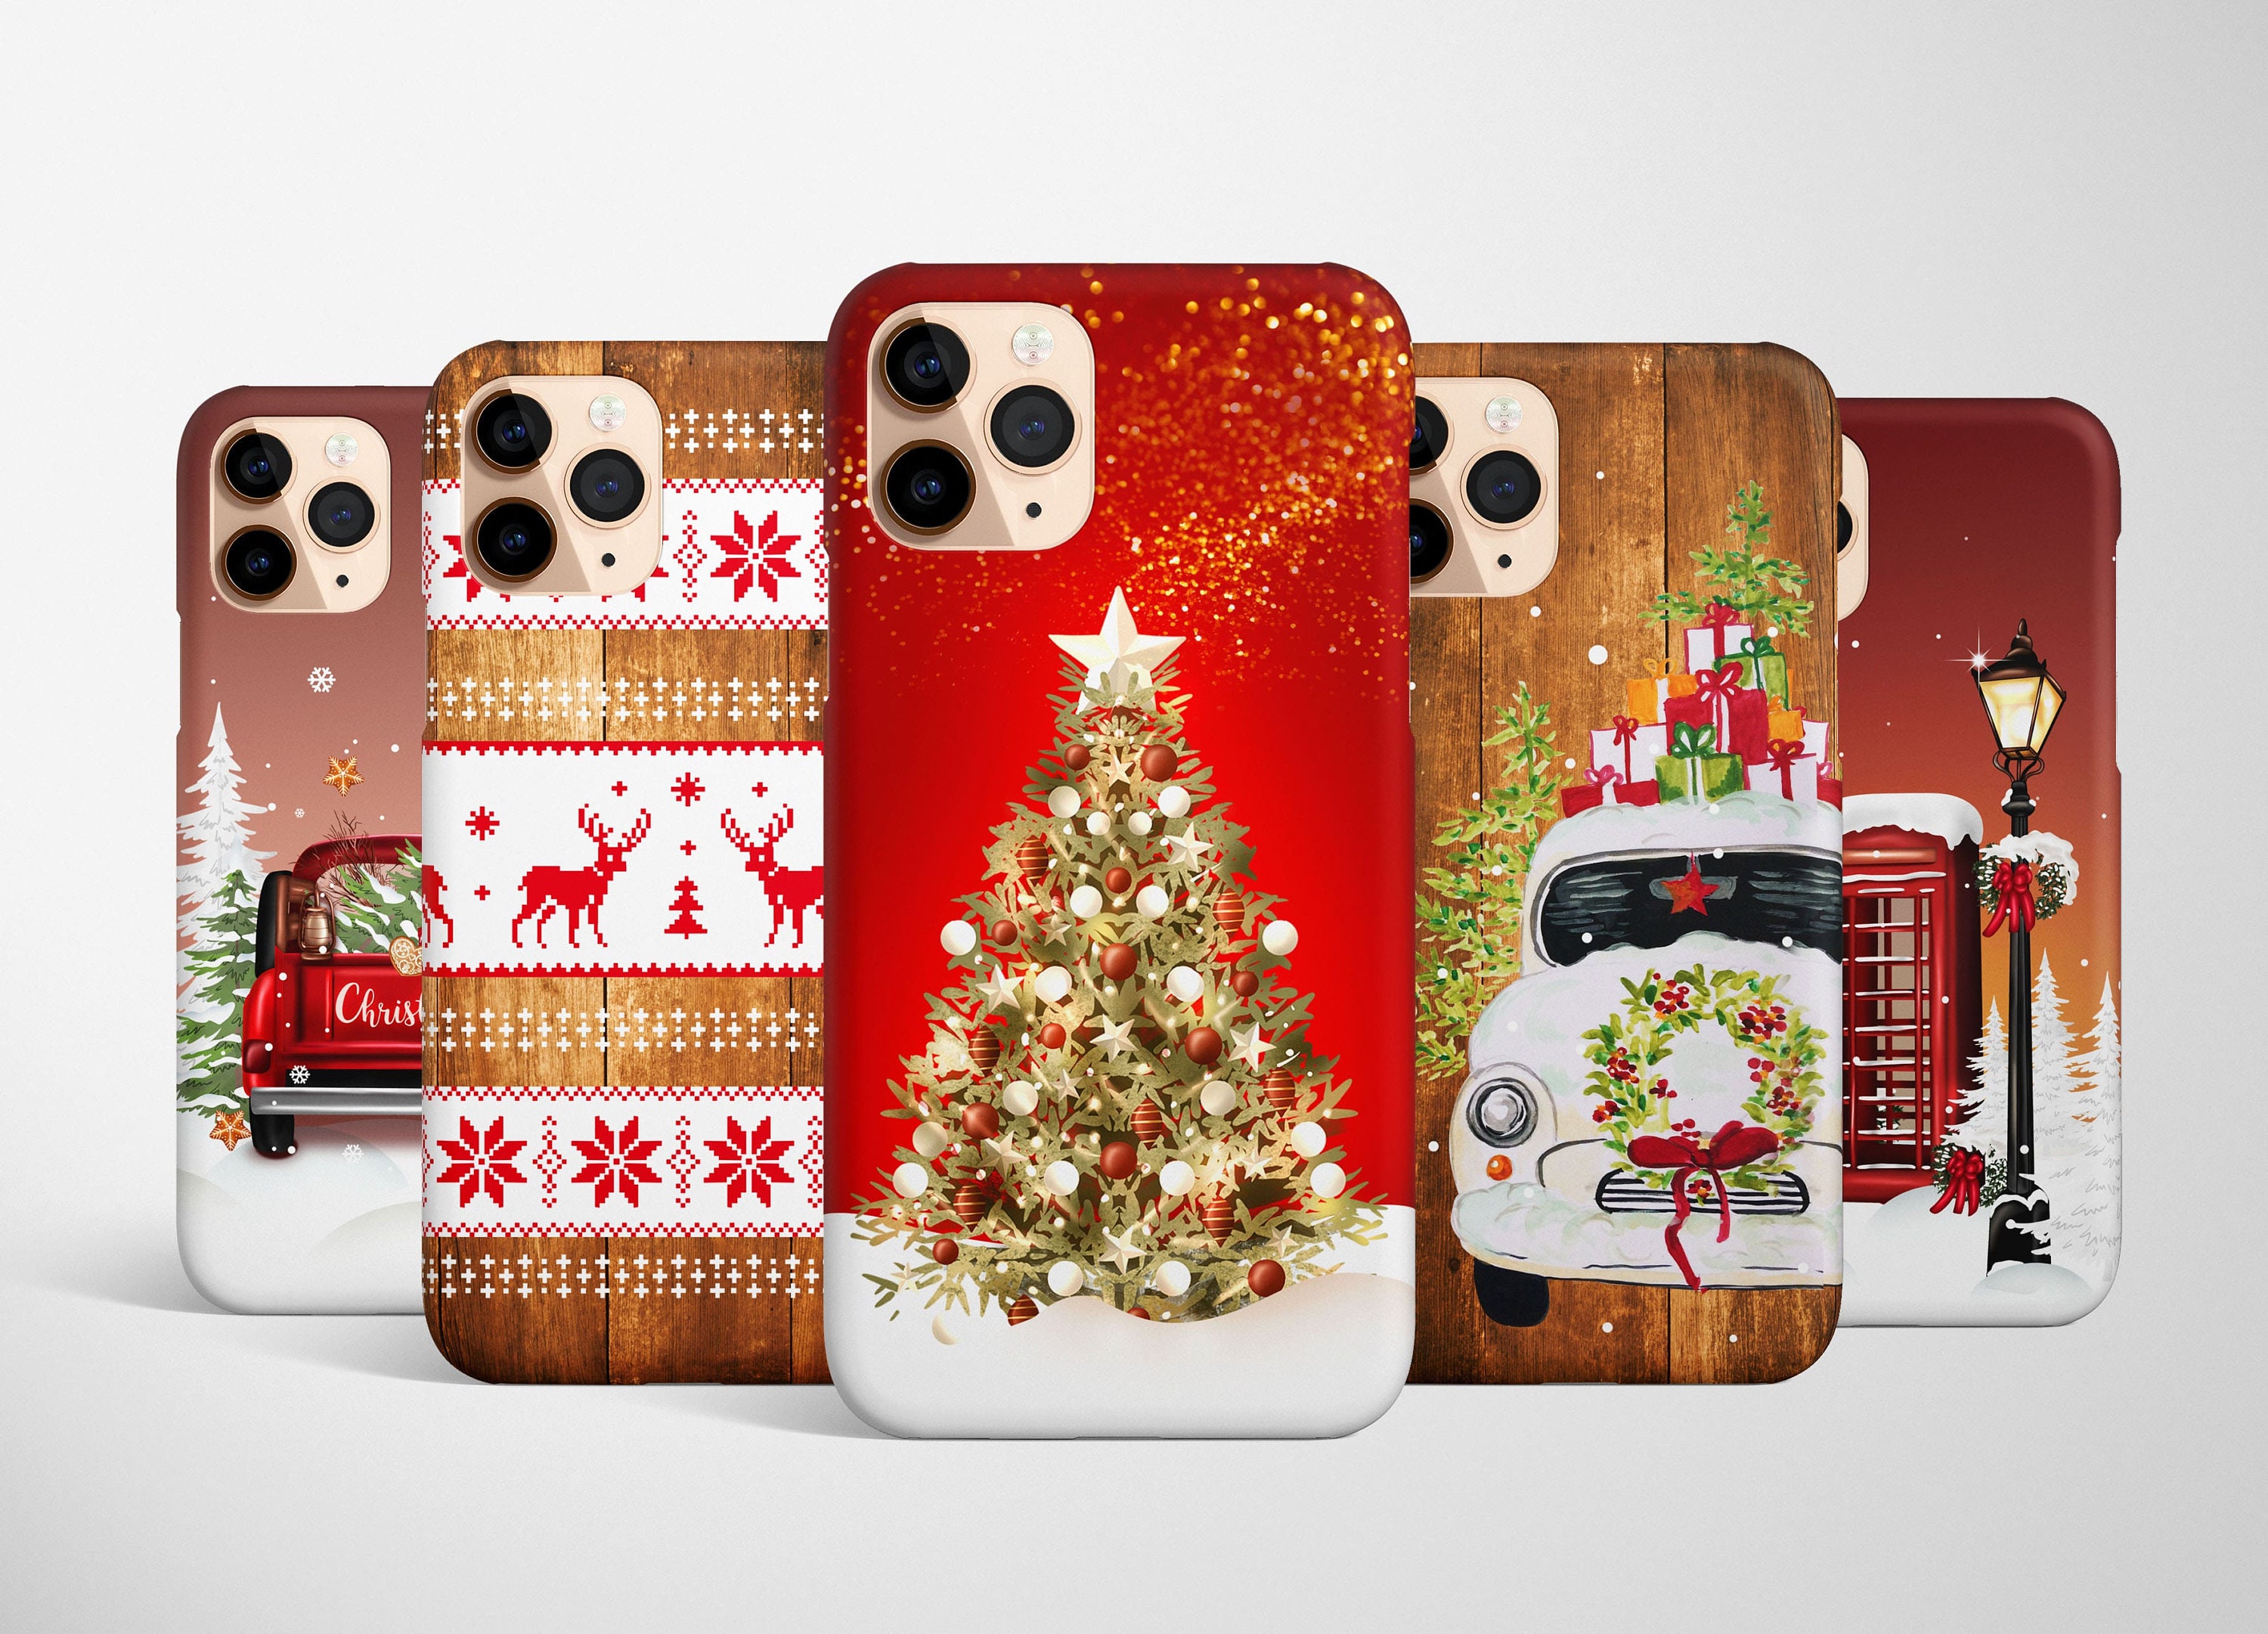 IPhone Pro models scarce in stores this holiday - Best Buy